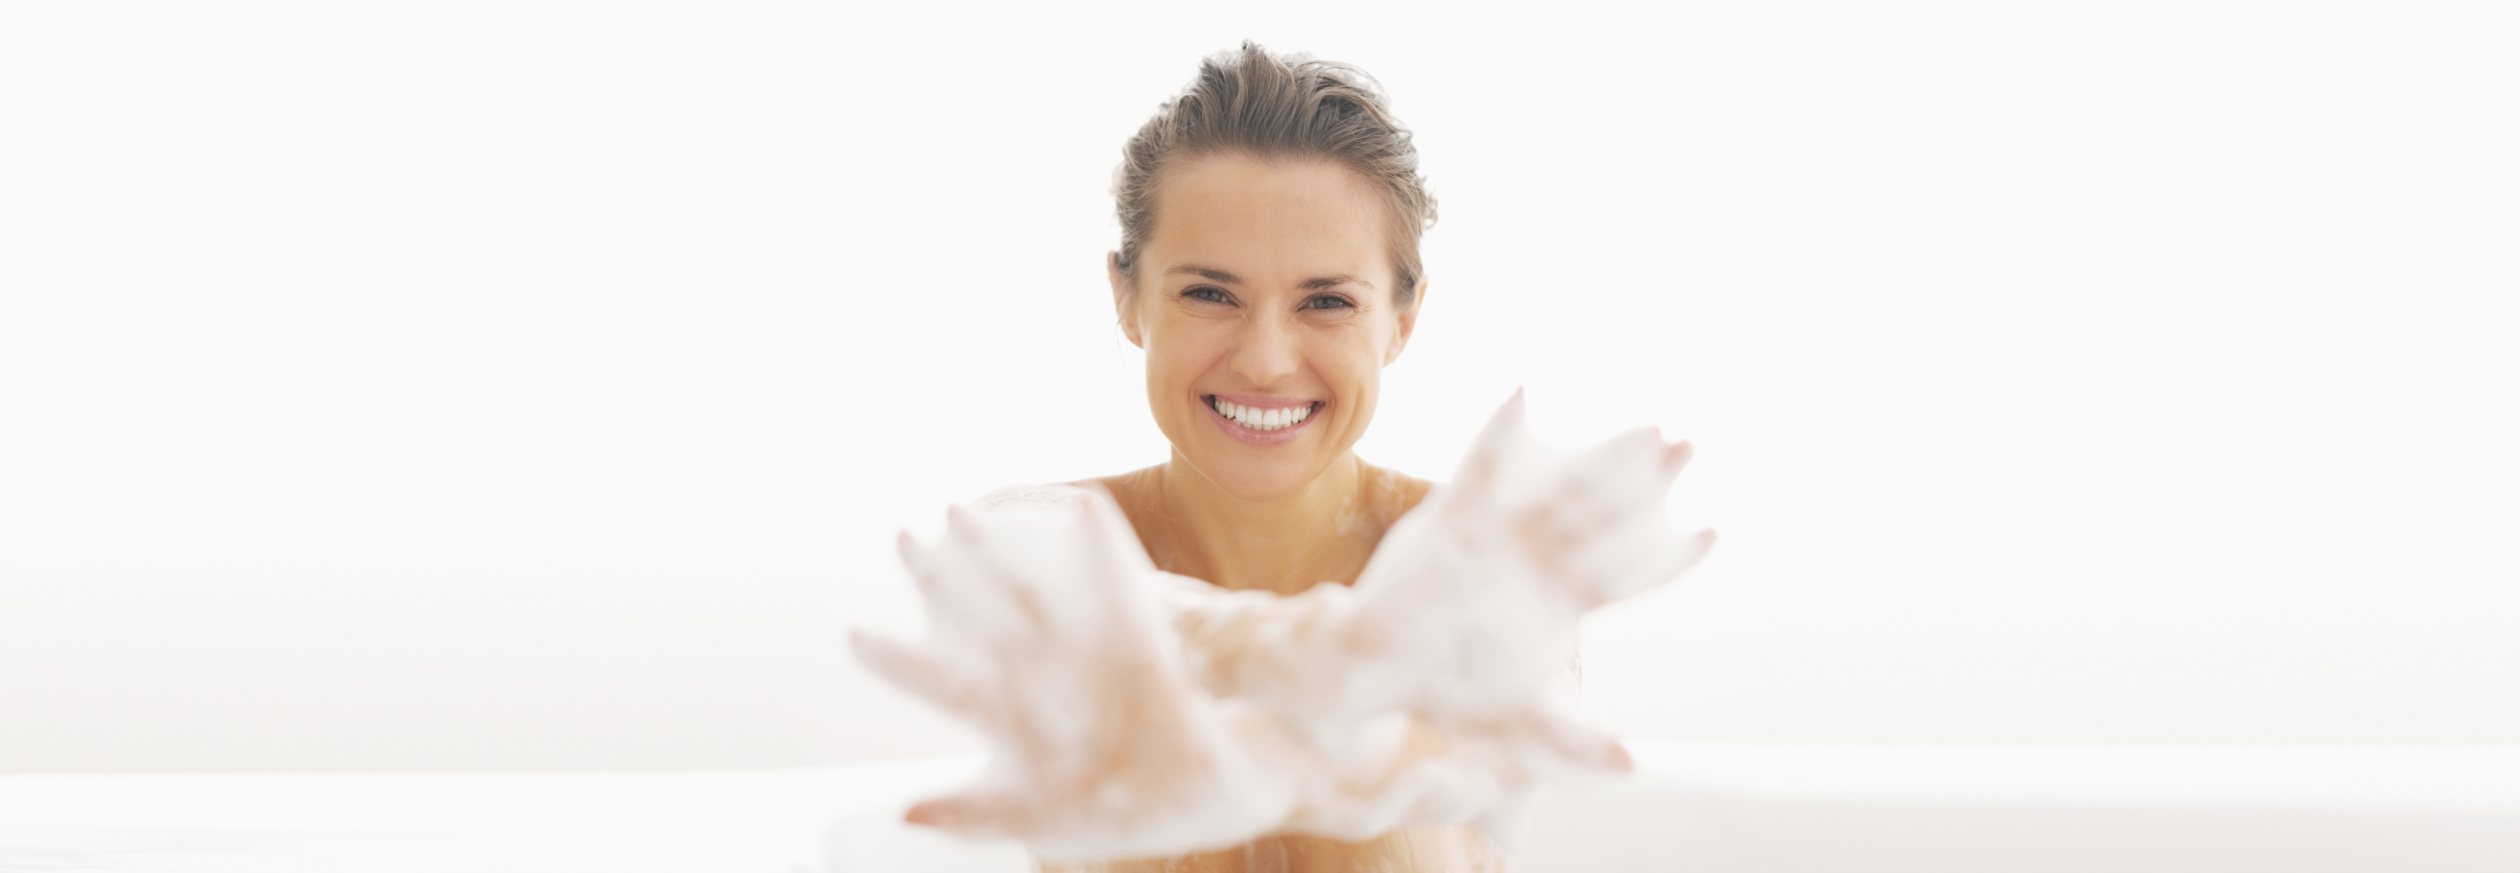 Smiling Young Woman Showing Hands In Foam